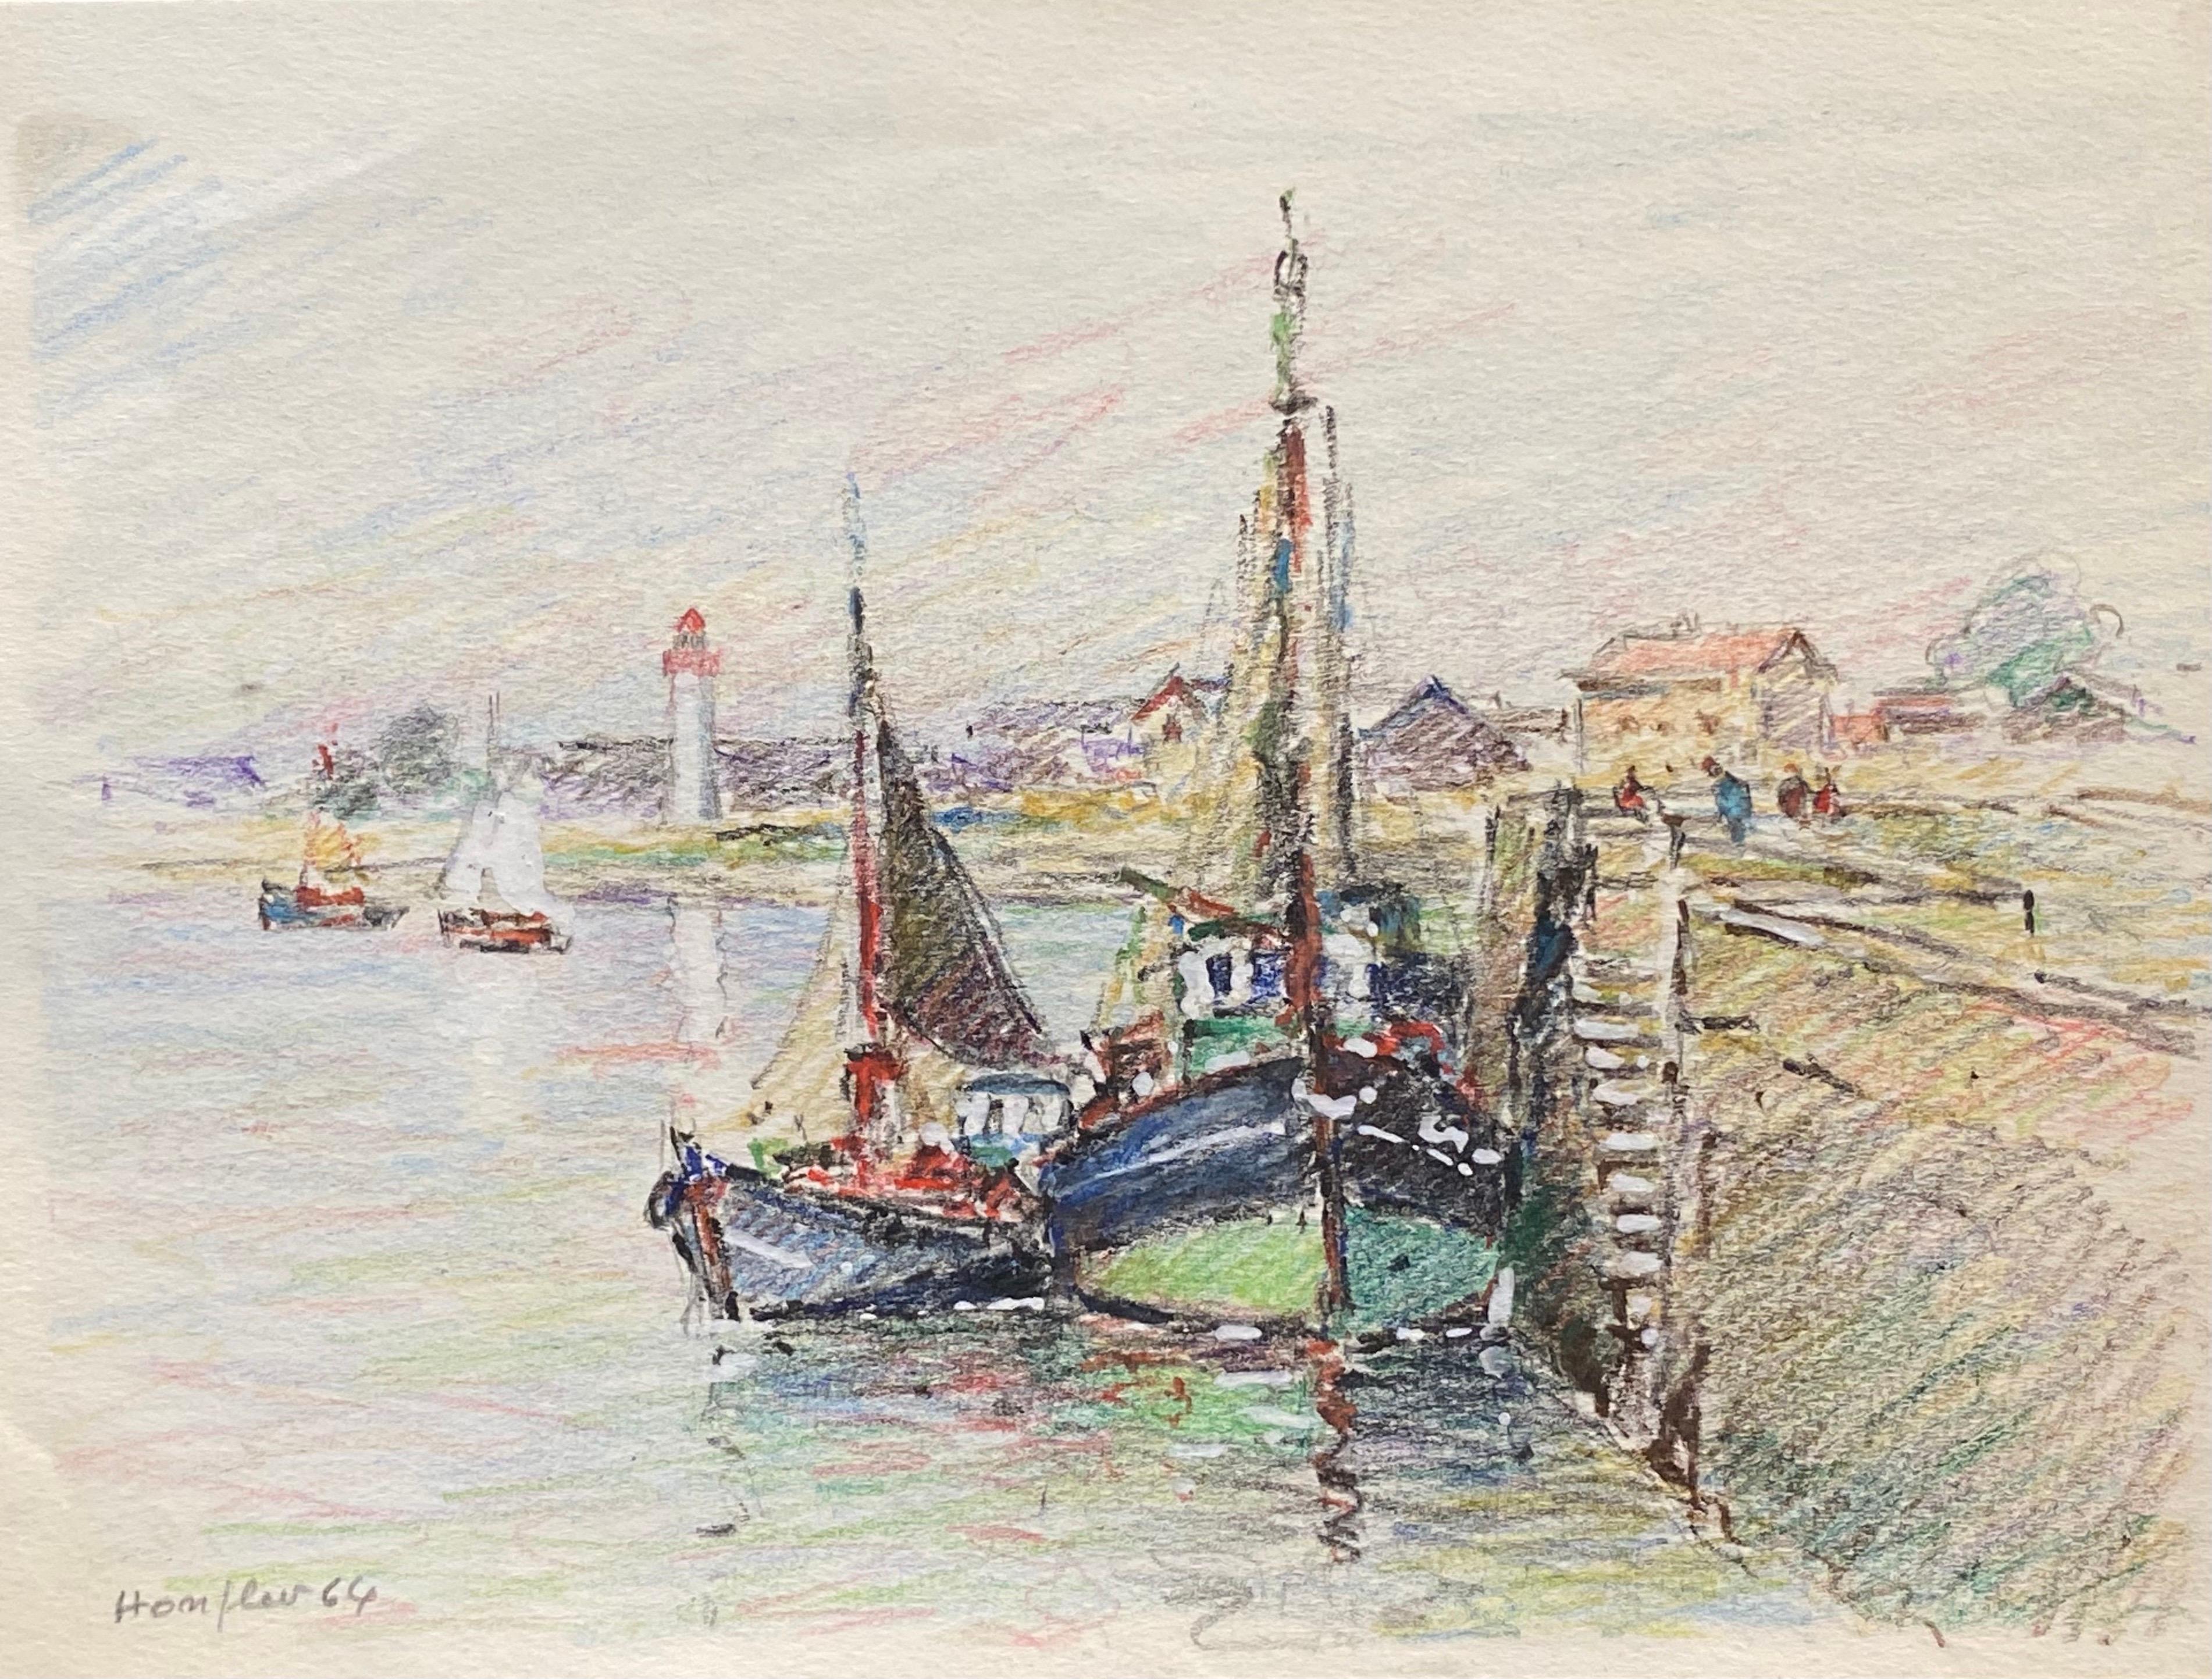 Camille Meriot Landscape Art - Brittany Fishing Boats in Harbour, French Signed Impressionist Crayon Drawing